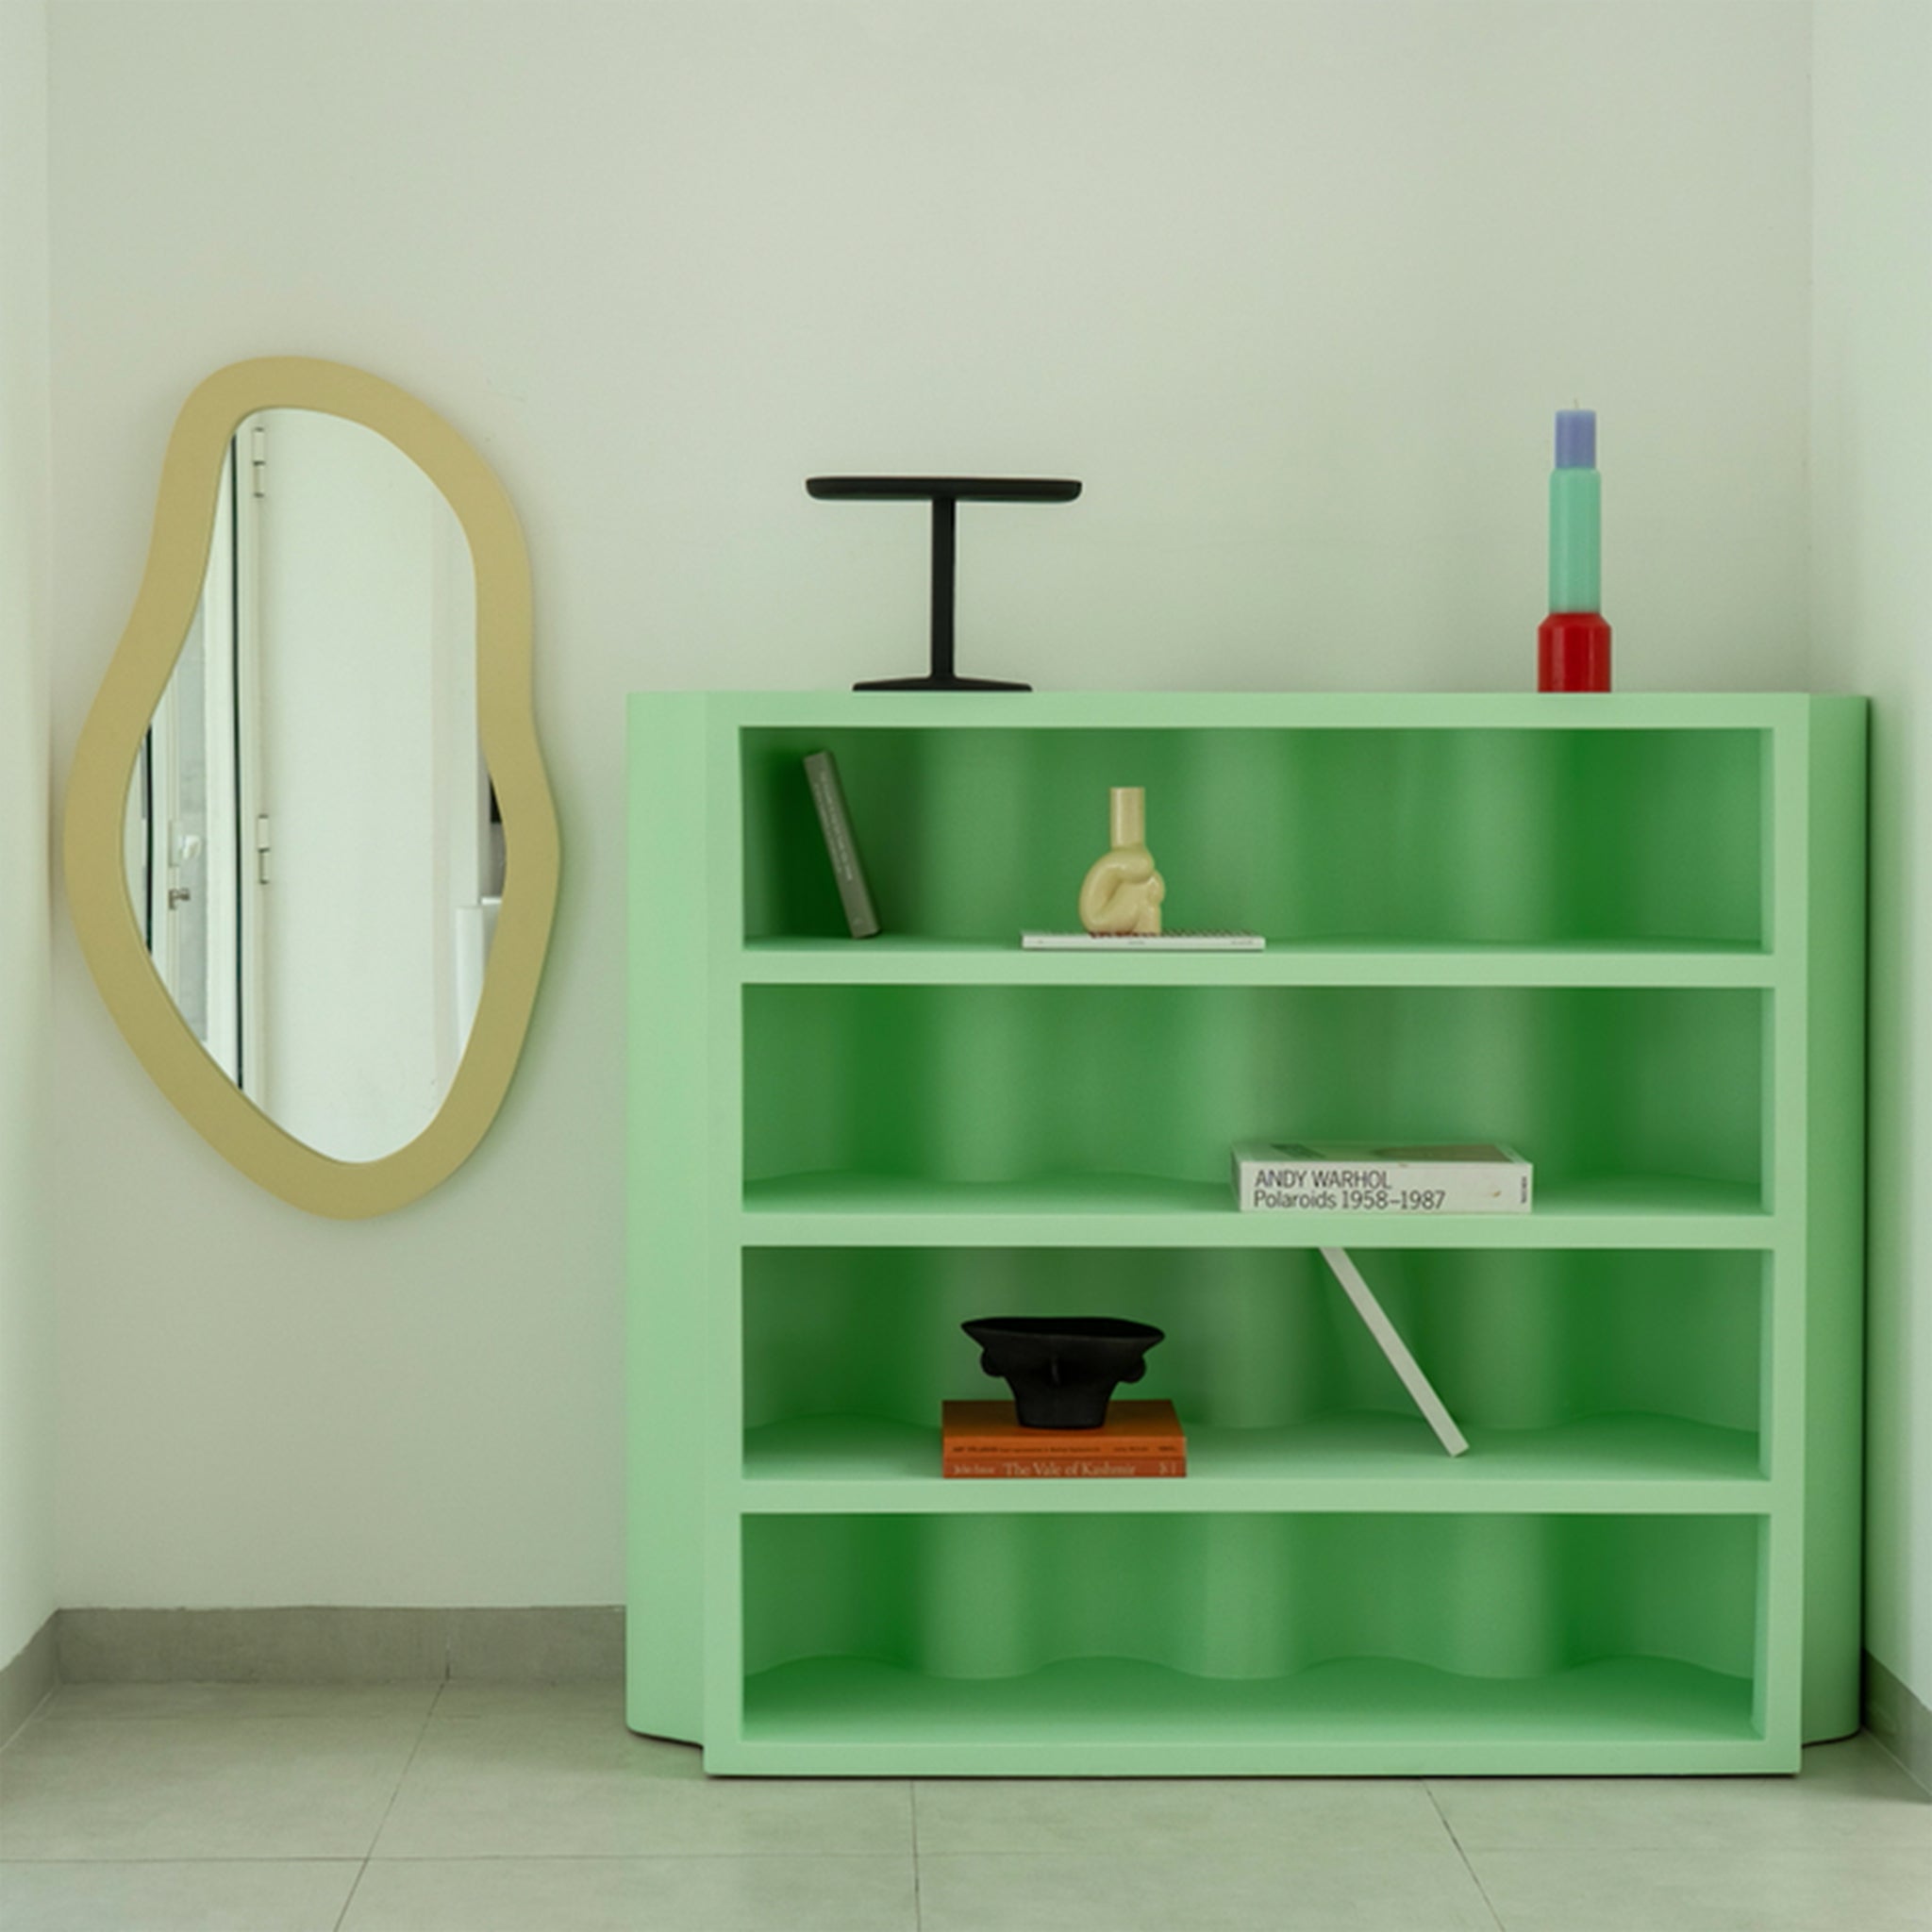 A contemporary green bookcase with a minimalist design, adorned with various decorative items and a book, placed next to a uniquely shaped mirror on the wall.